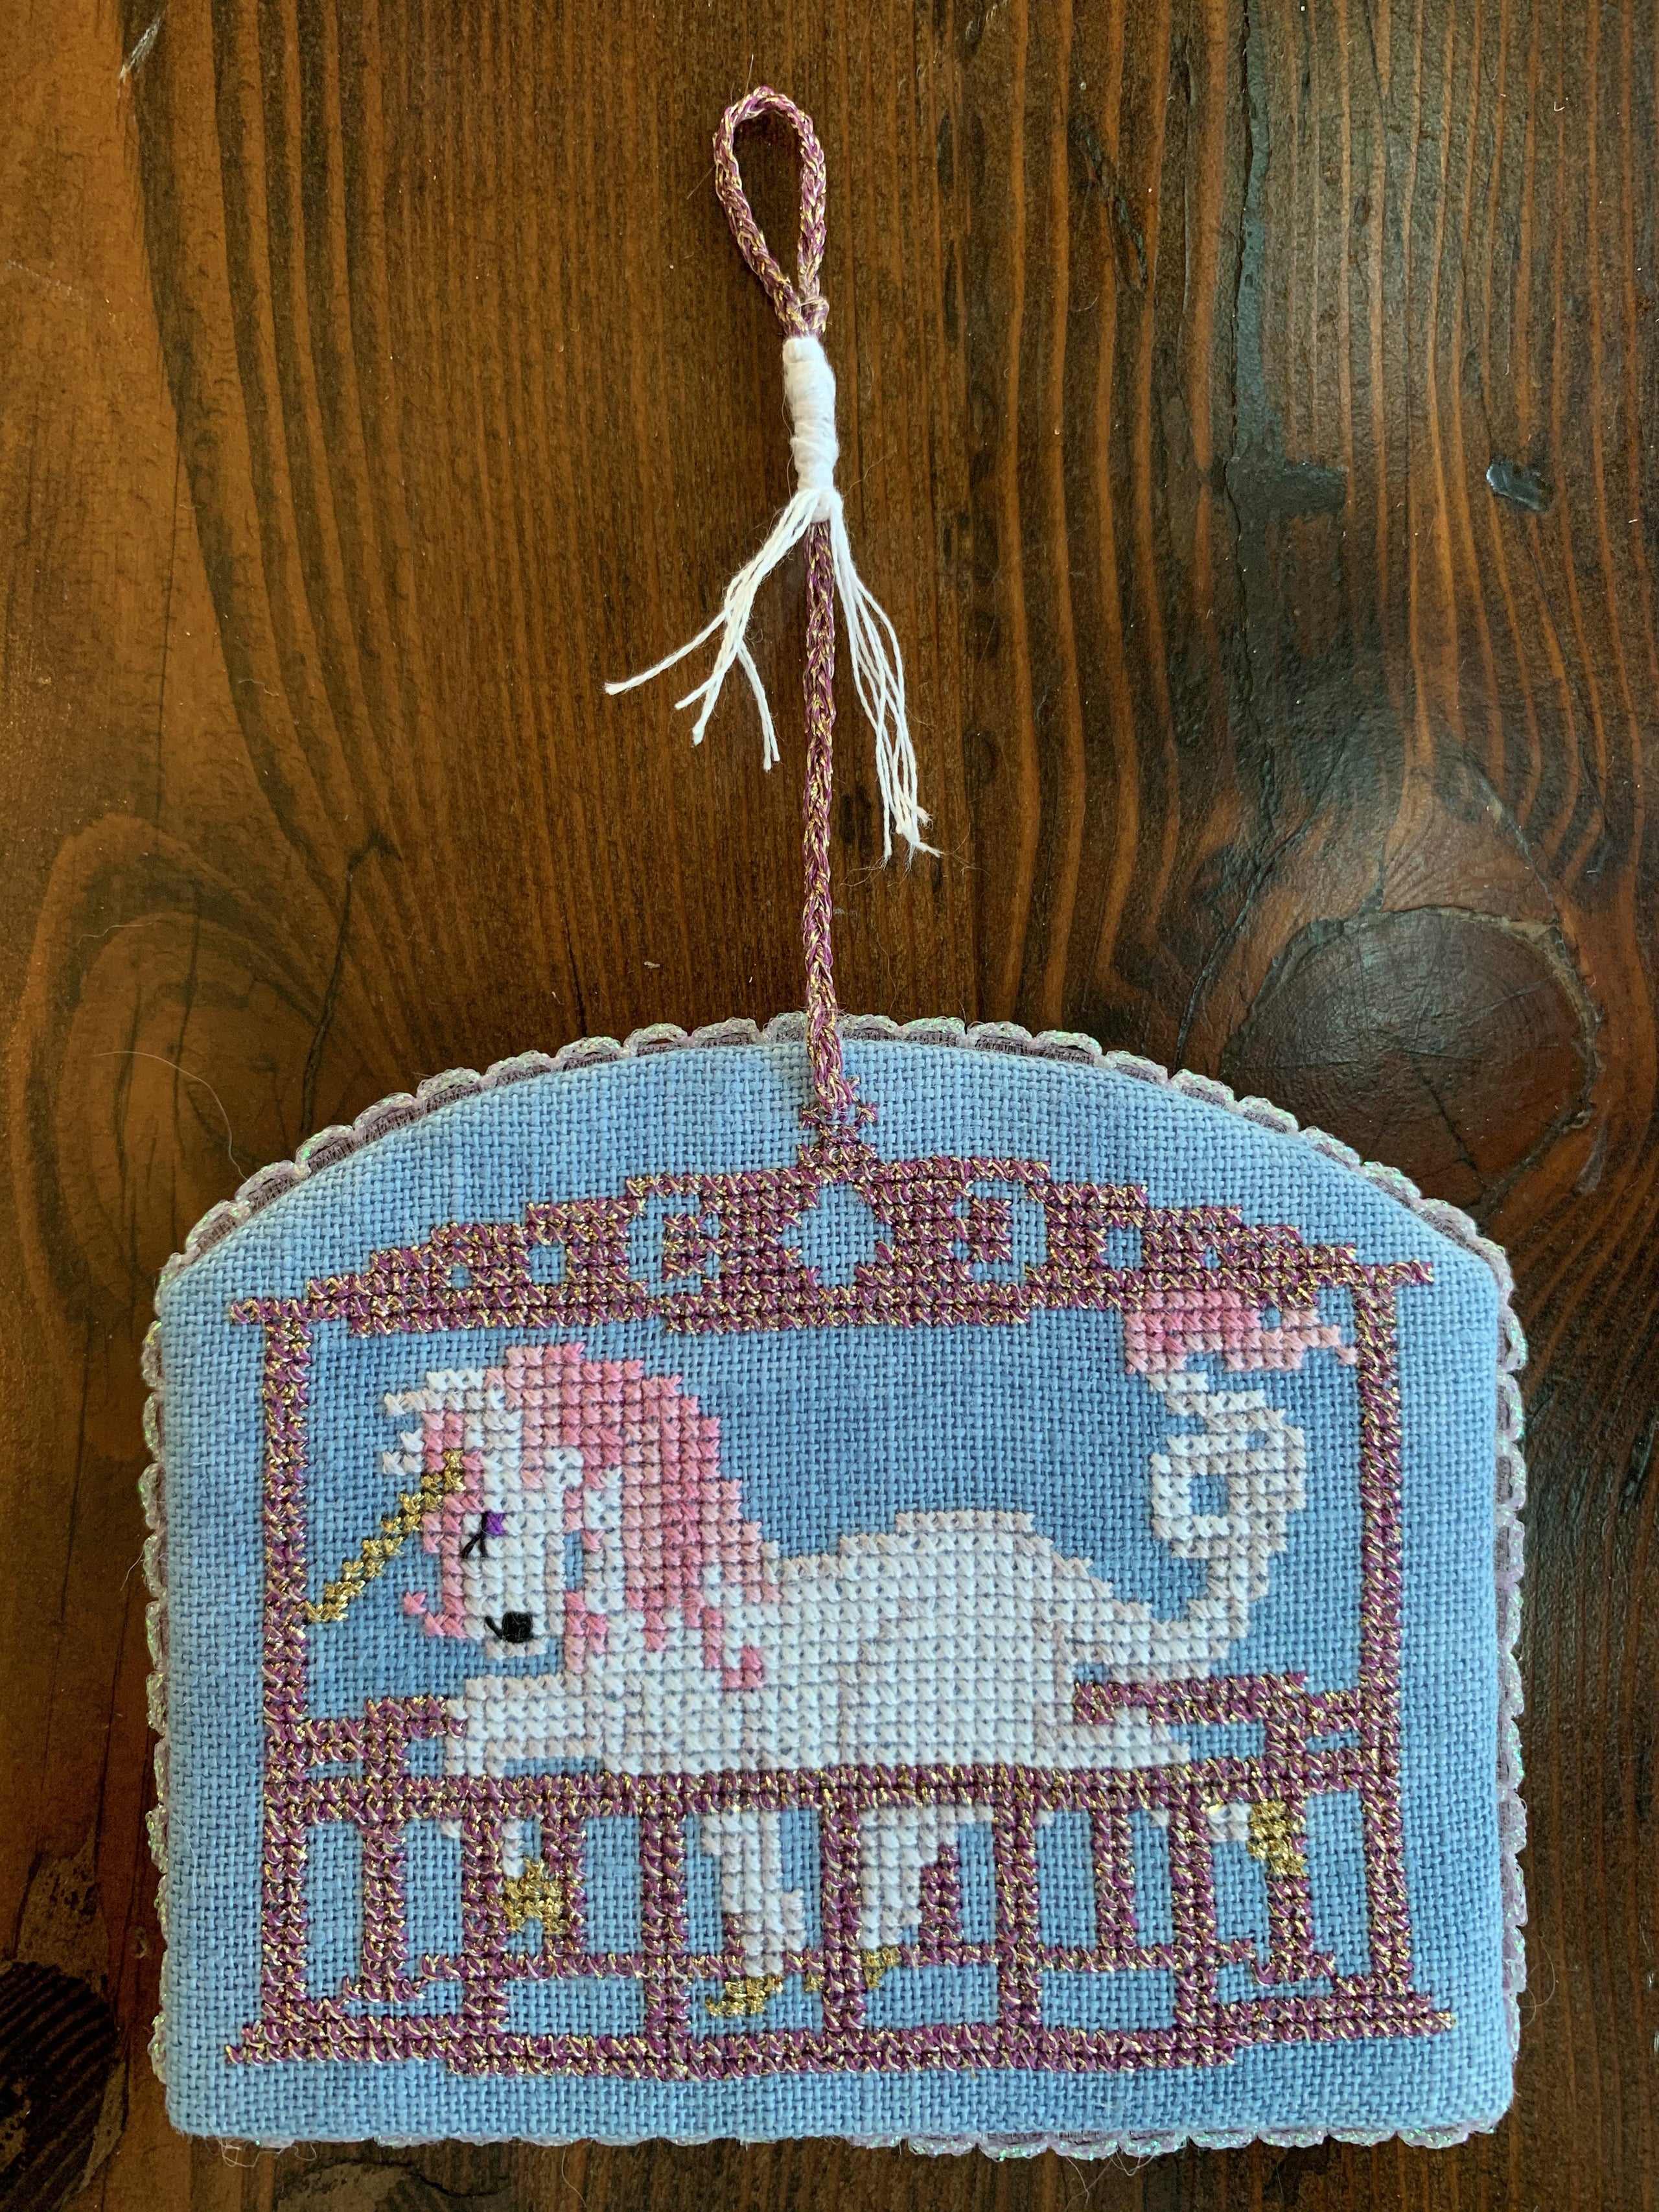 A Menagerie of Stitches added a - A Menagerie of Stitches